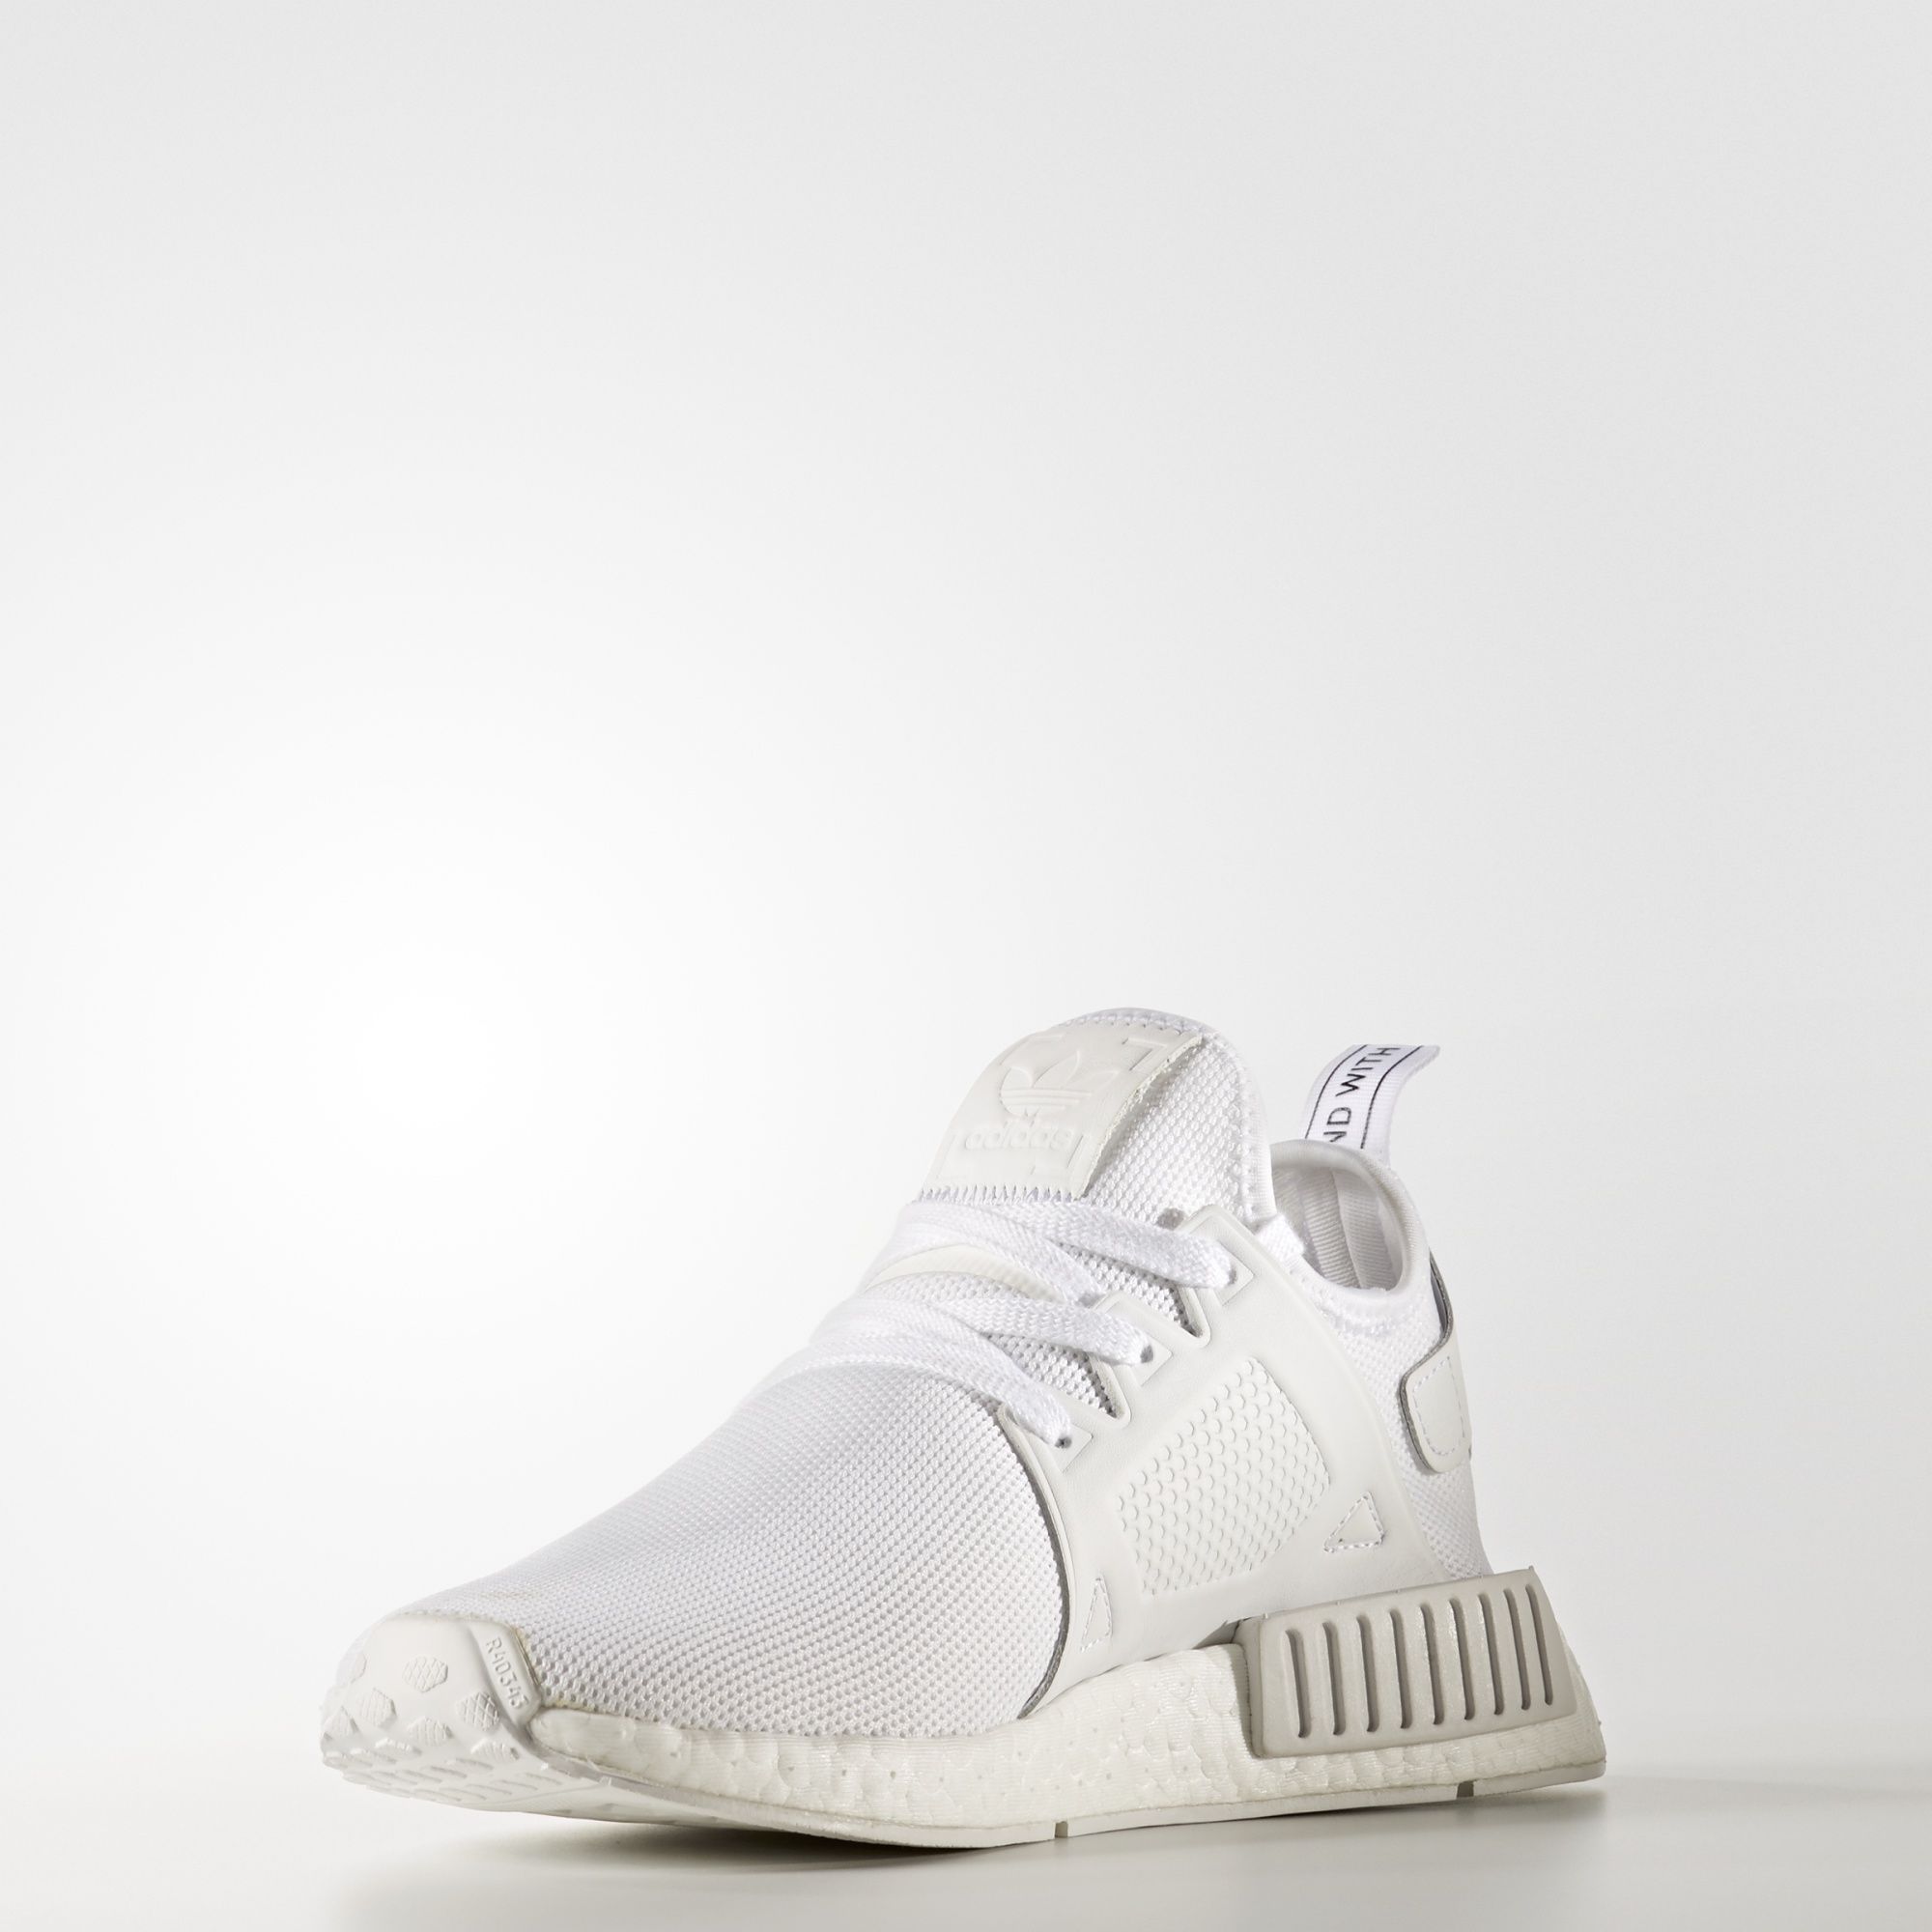 adidas-nmd_xr1-triple-white-leather-cage-3